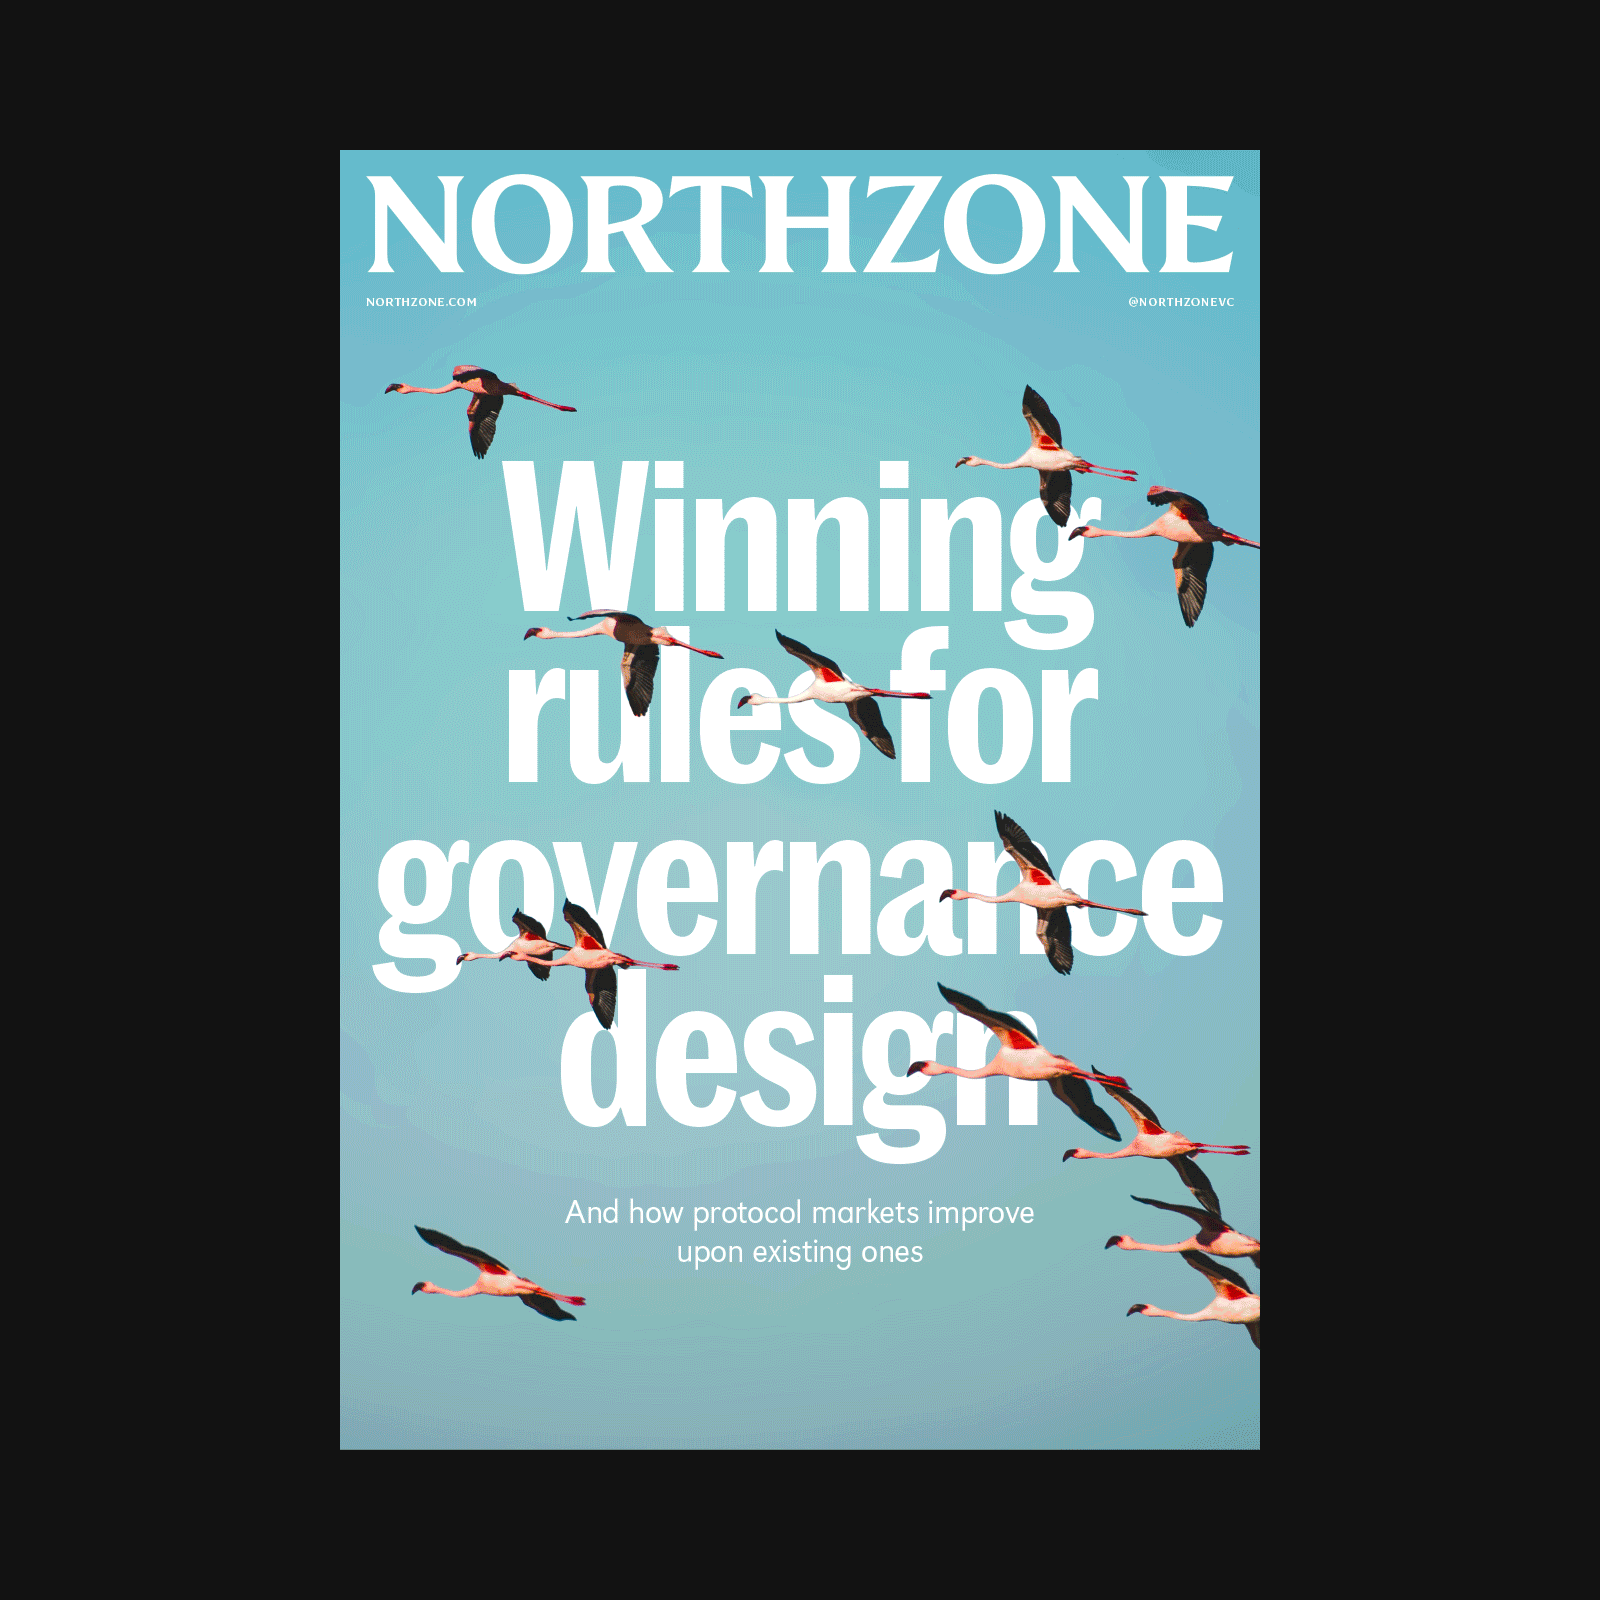 Brand identity, logo, business cards, newsprint and website for early stage venture capital fund Northzone designed by Ragged Edge